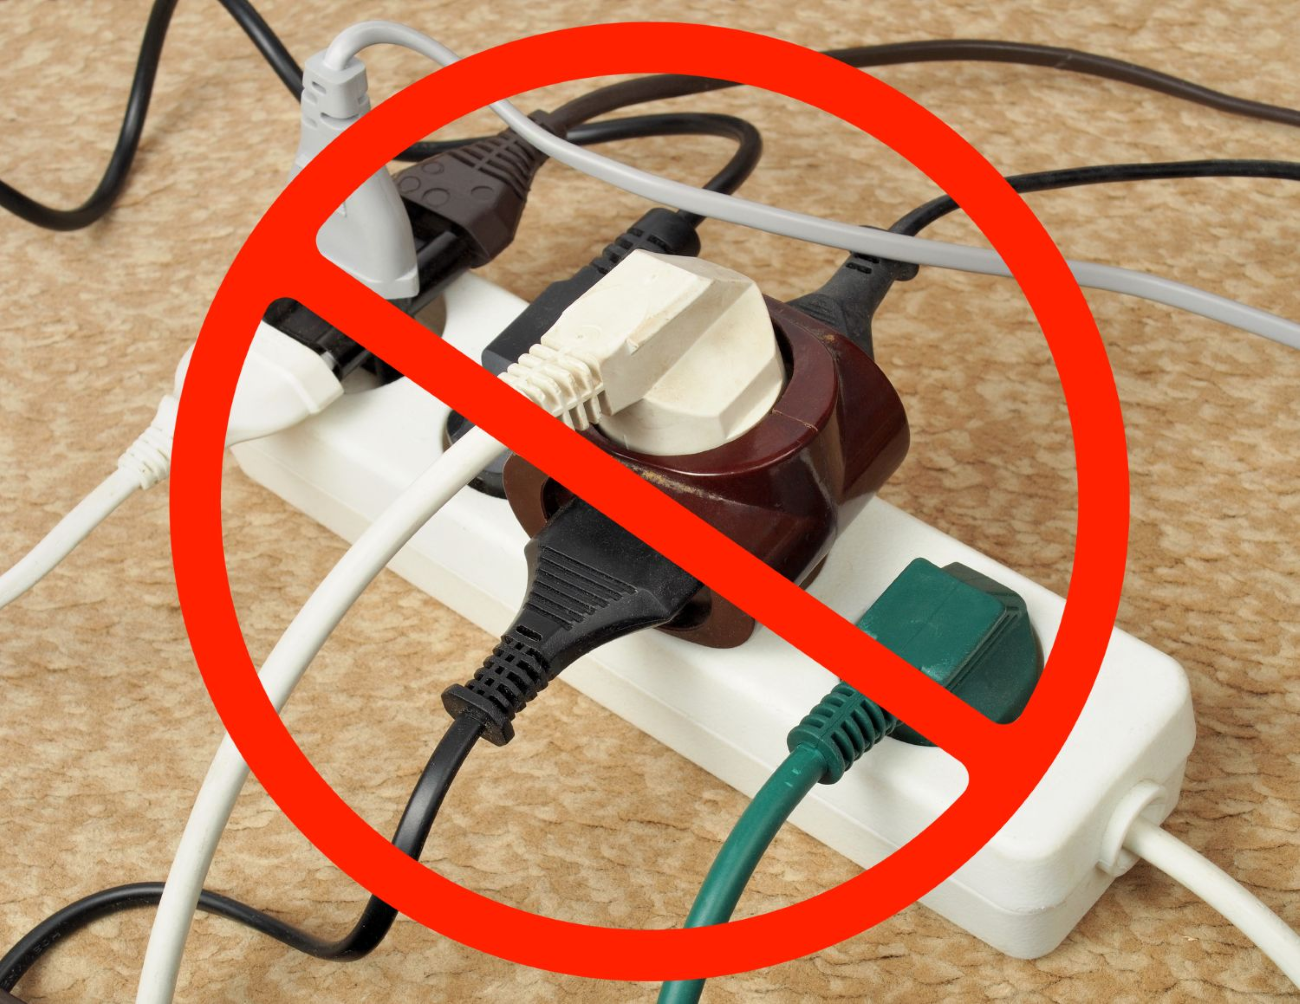 Extension cord with excessive plug-ins